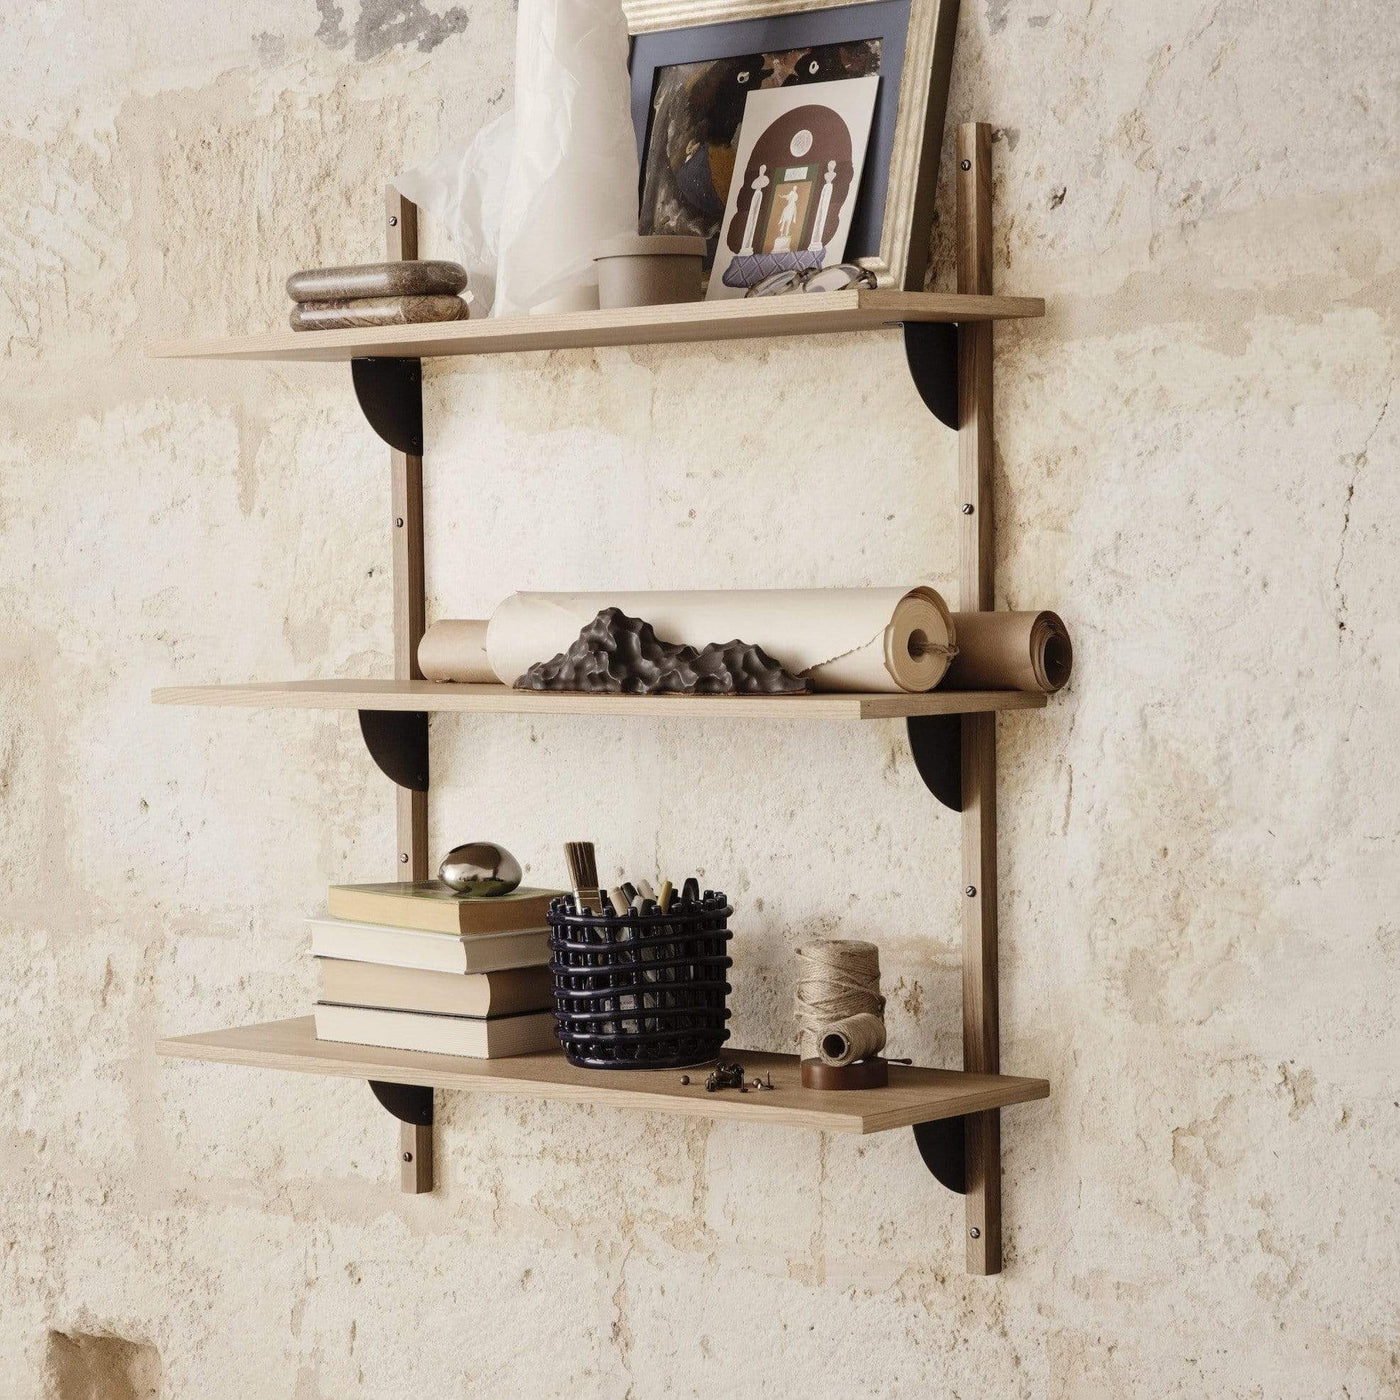 Ferm Living Sector Shelf triple wide in natural oak with blackened brass brackets. Available from someday designs 